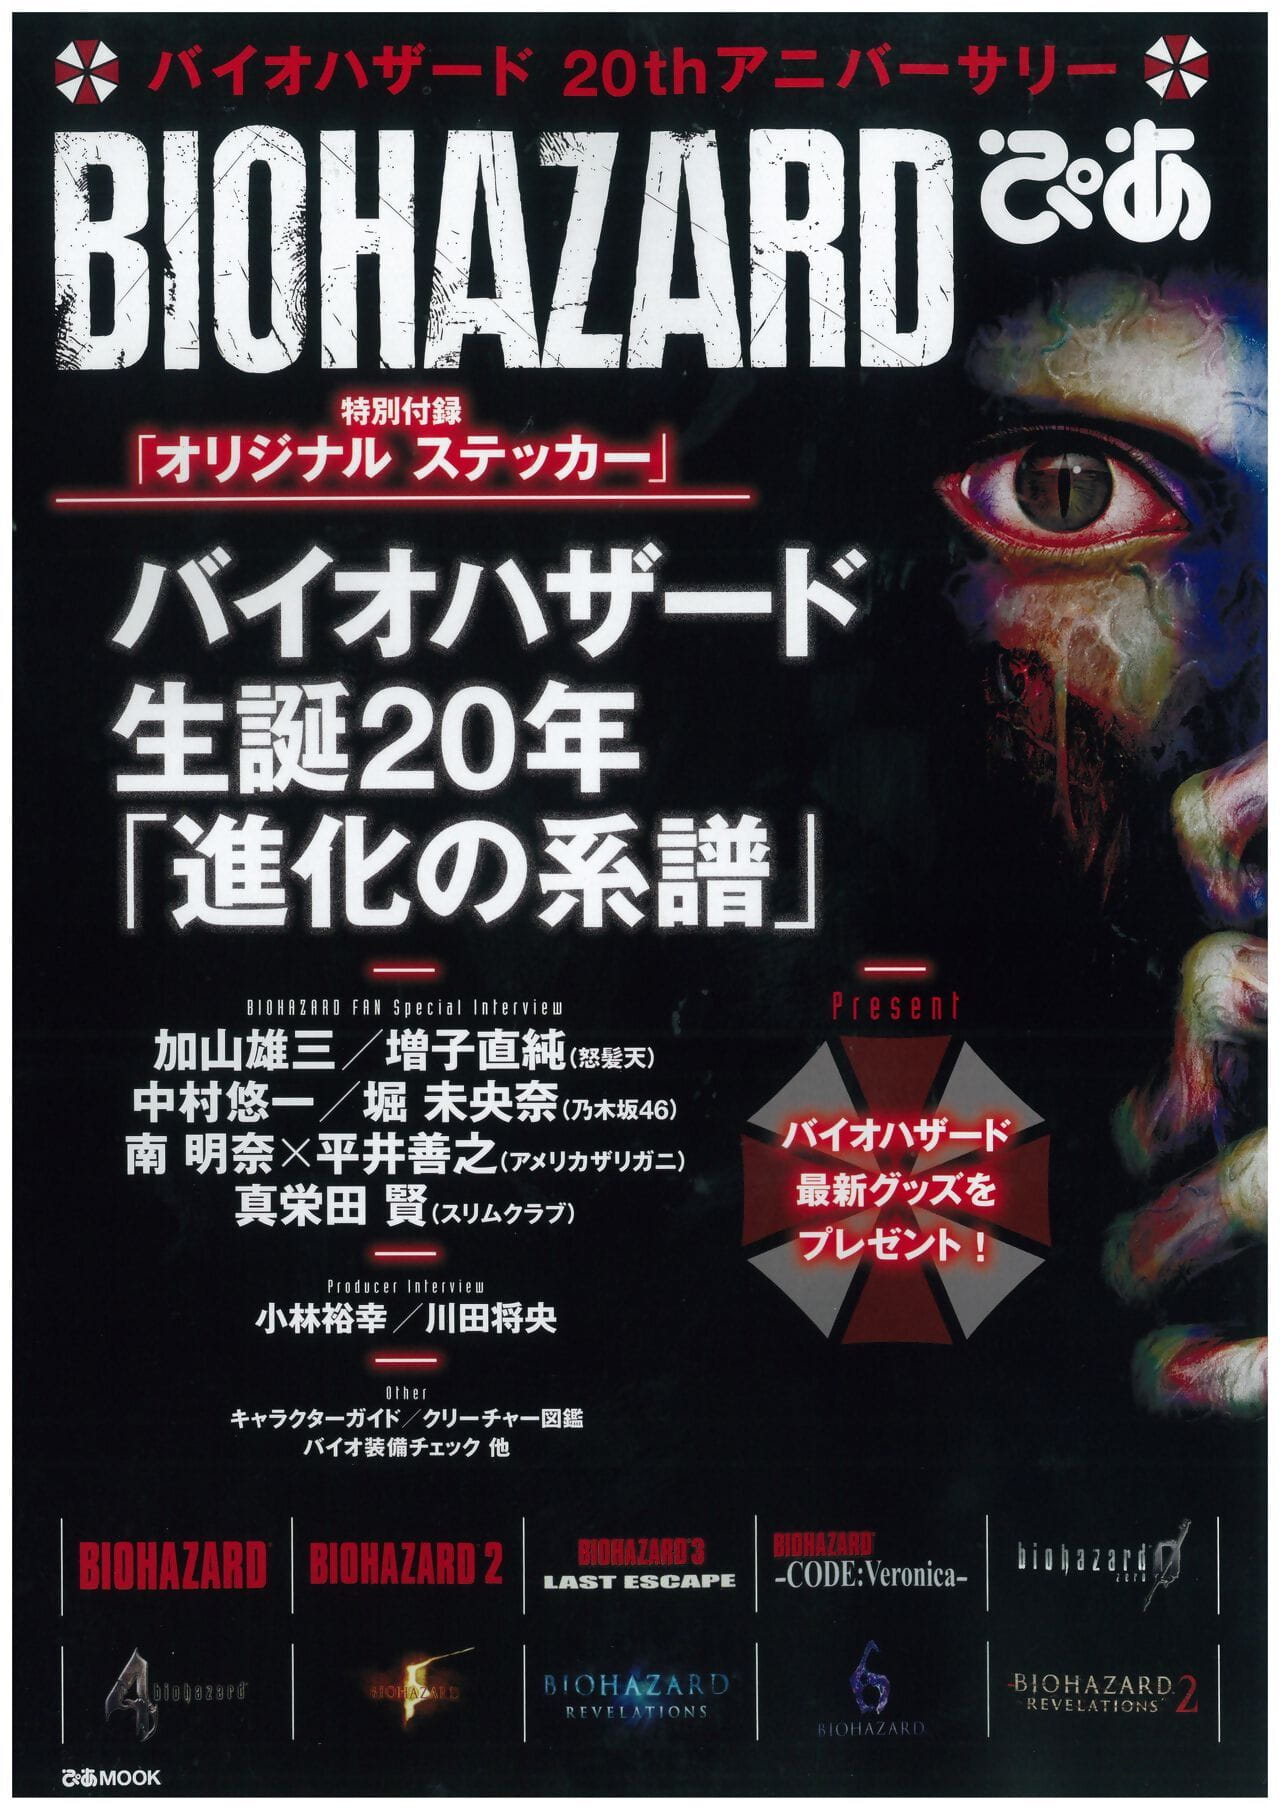 BIOHAZARD 20th Holy day book（1996.3.22-2016.3.22）